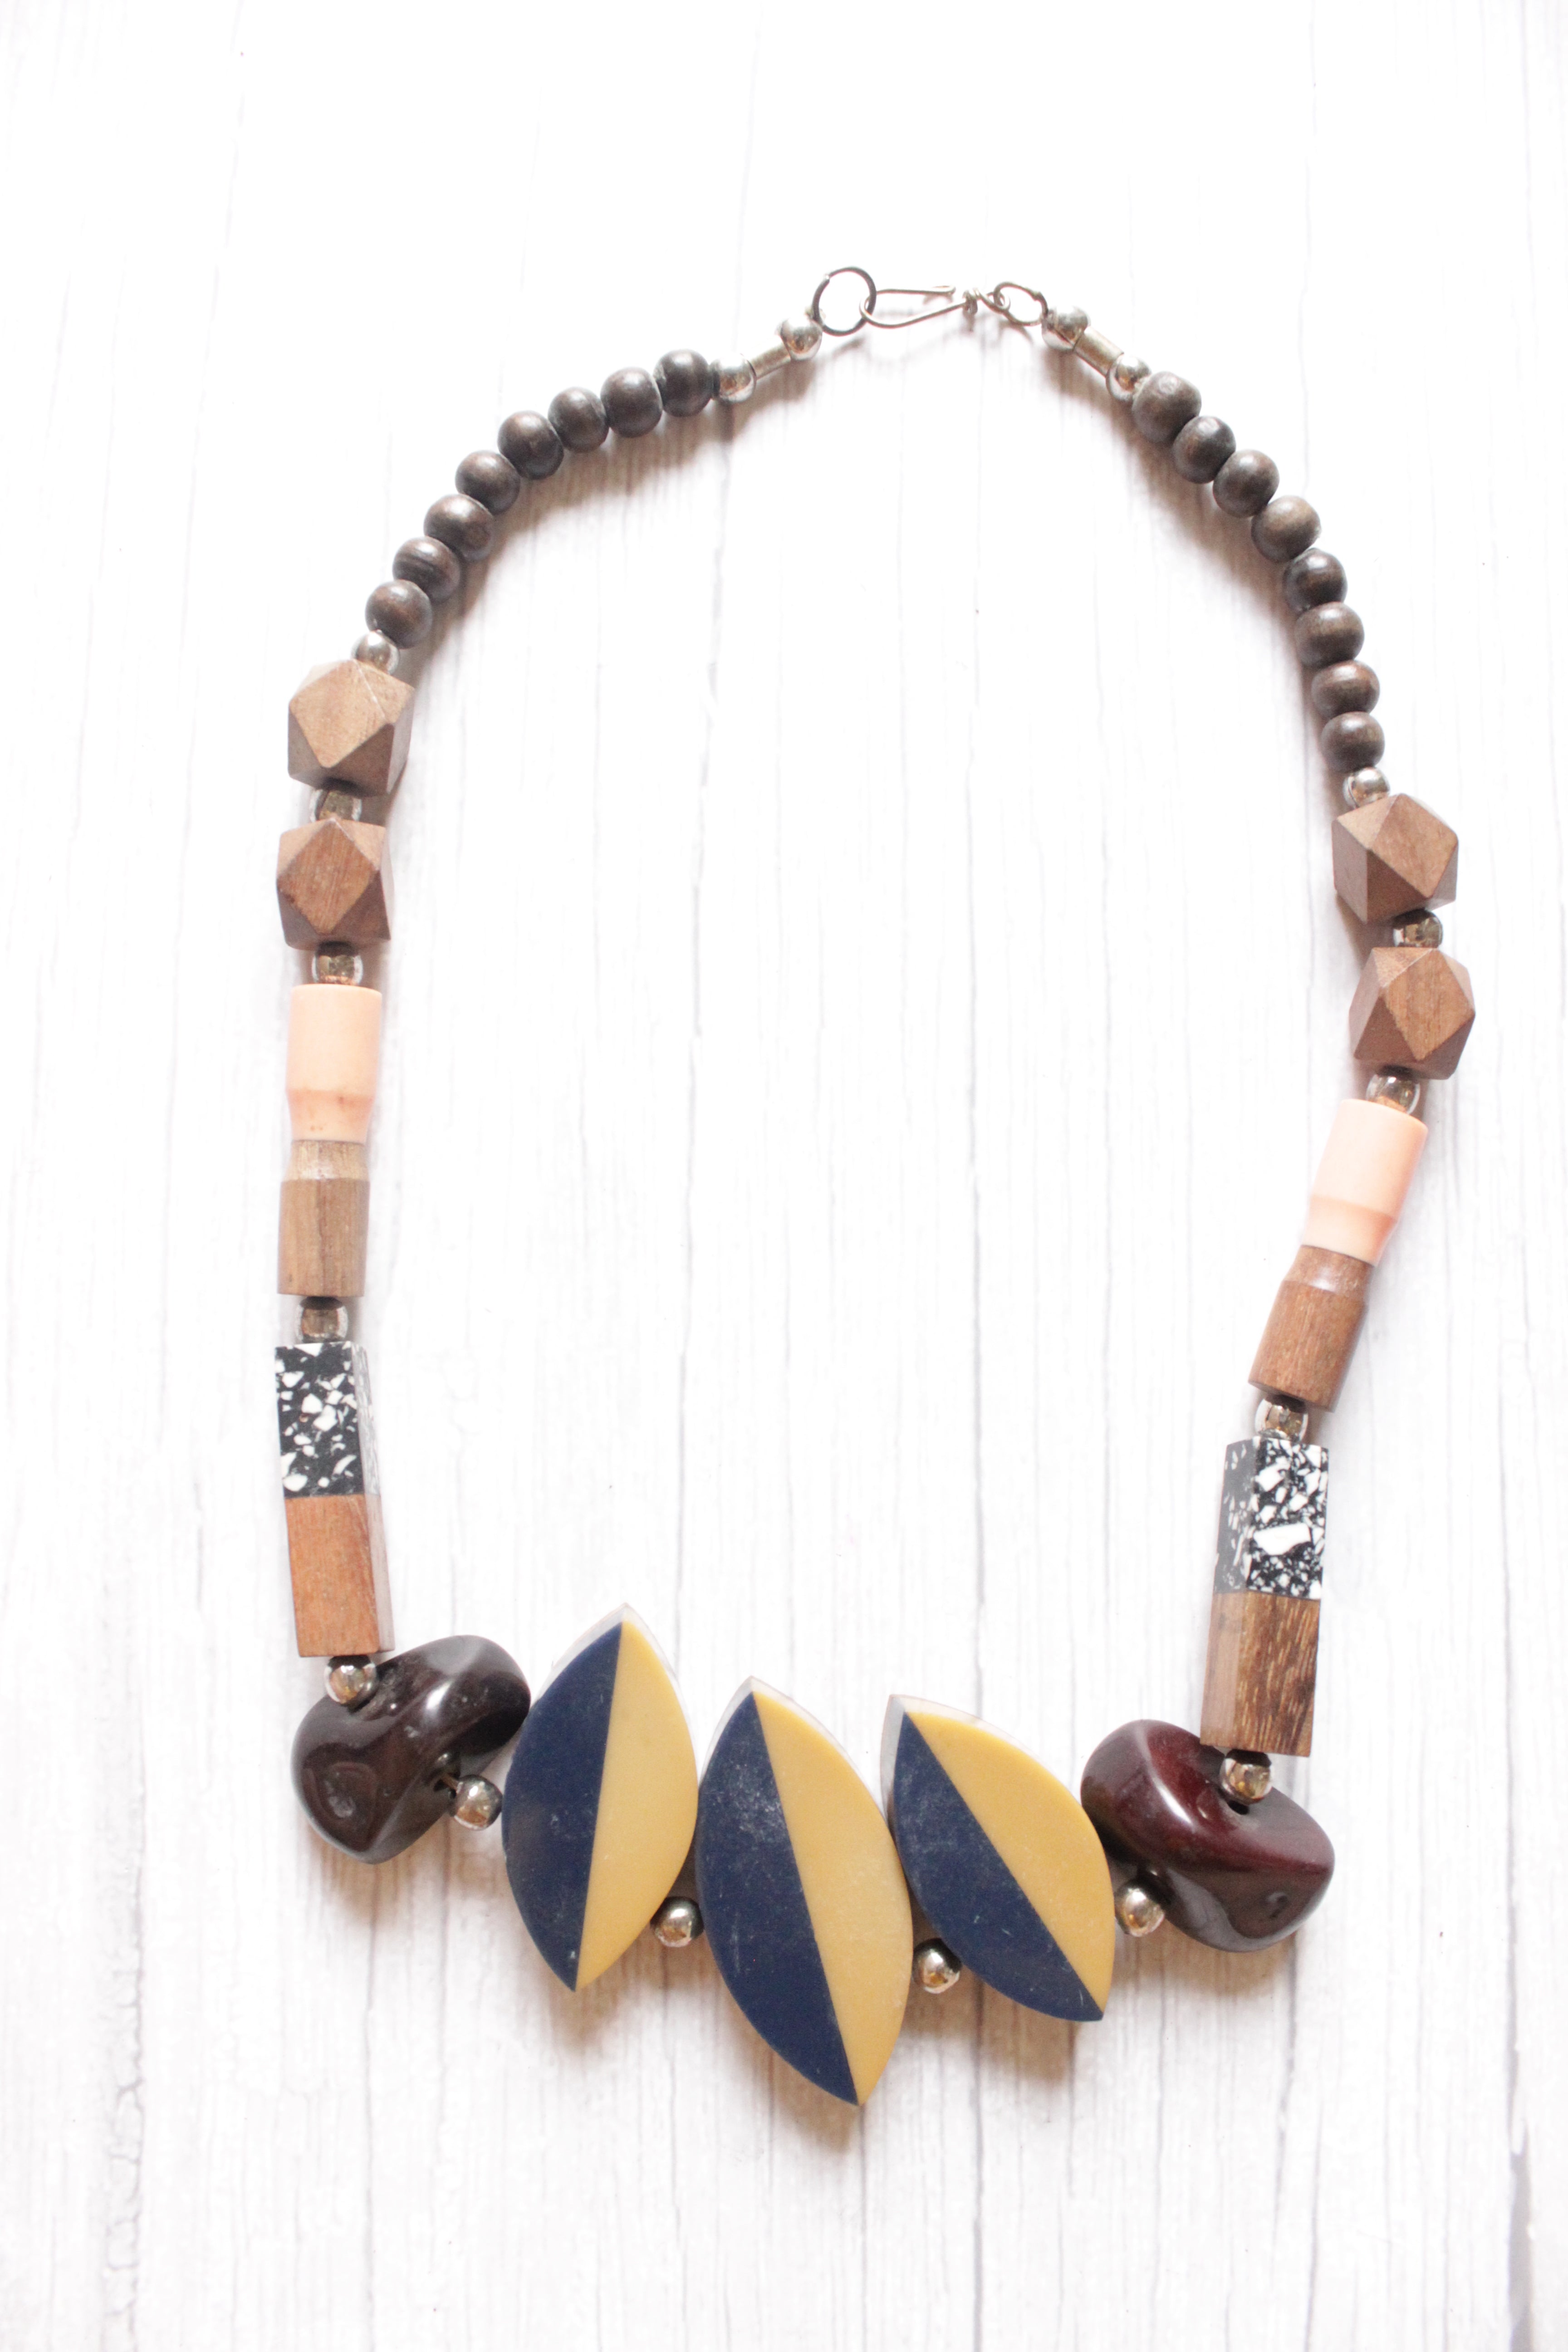 Stones and Wooden Work Handmade Necklace